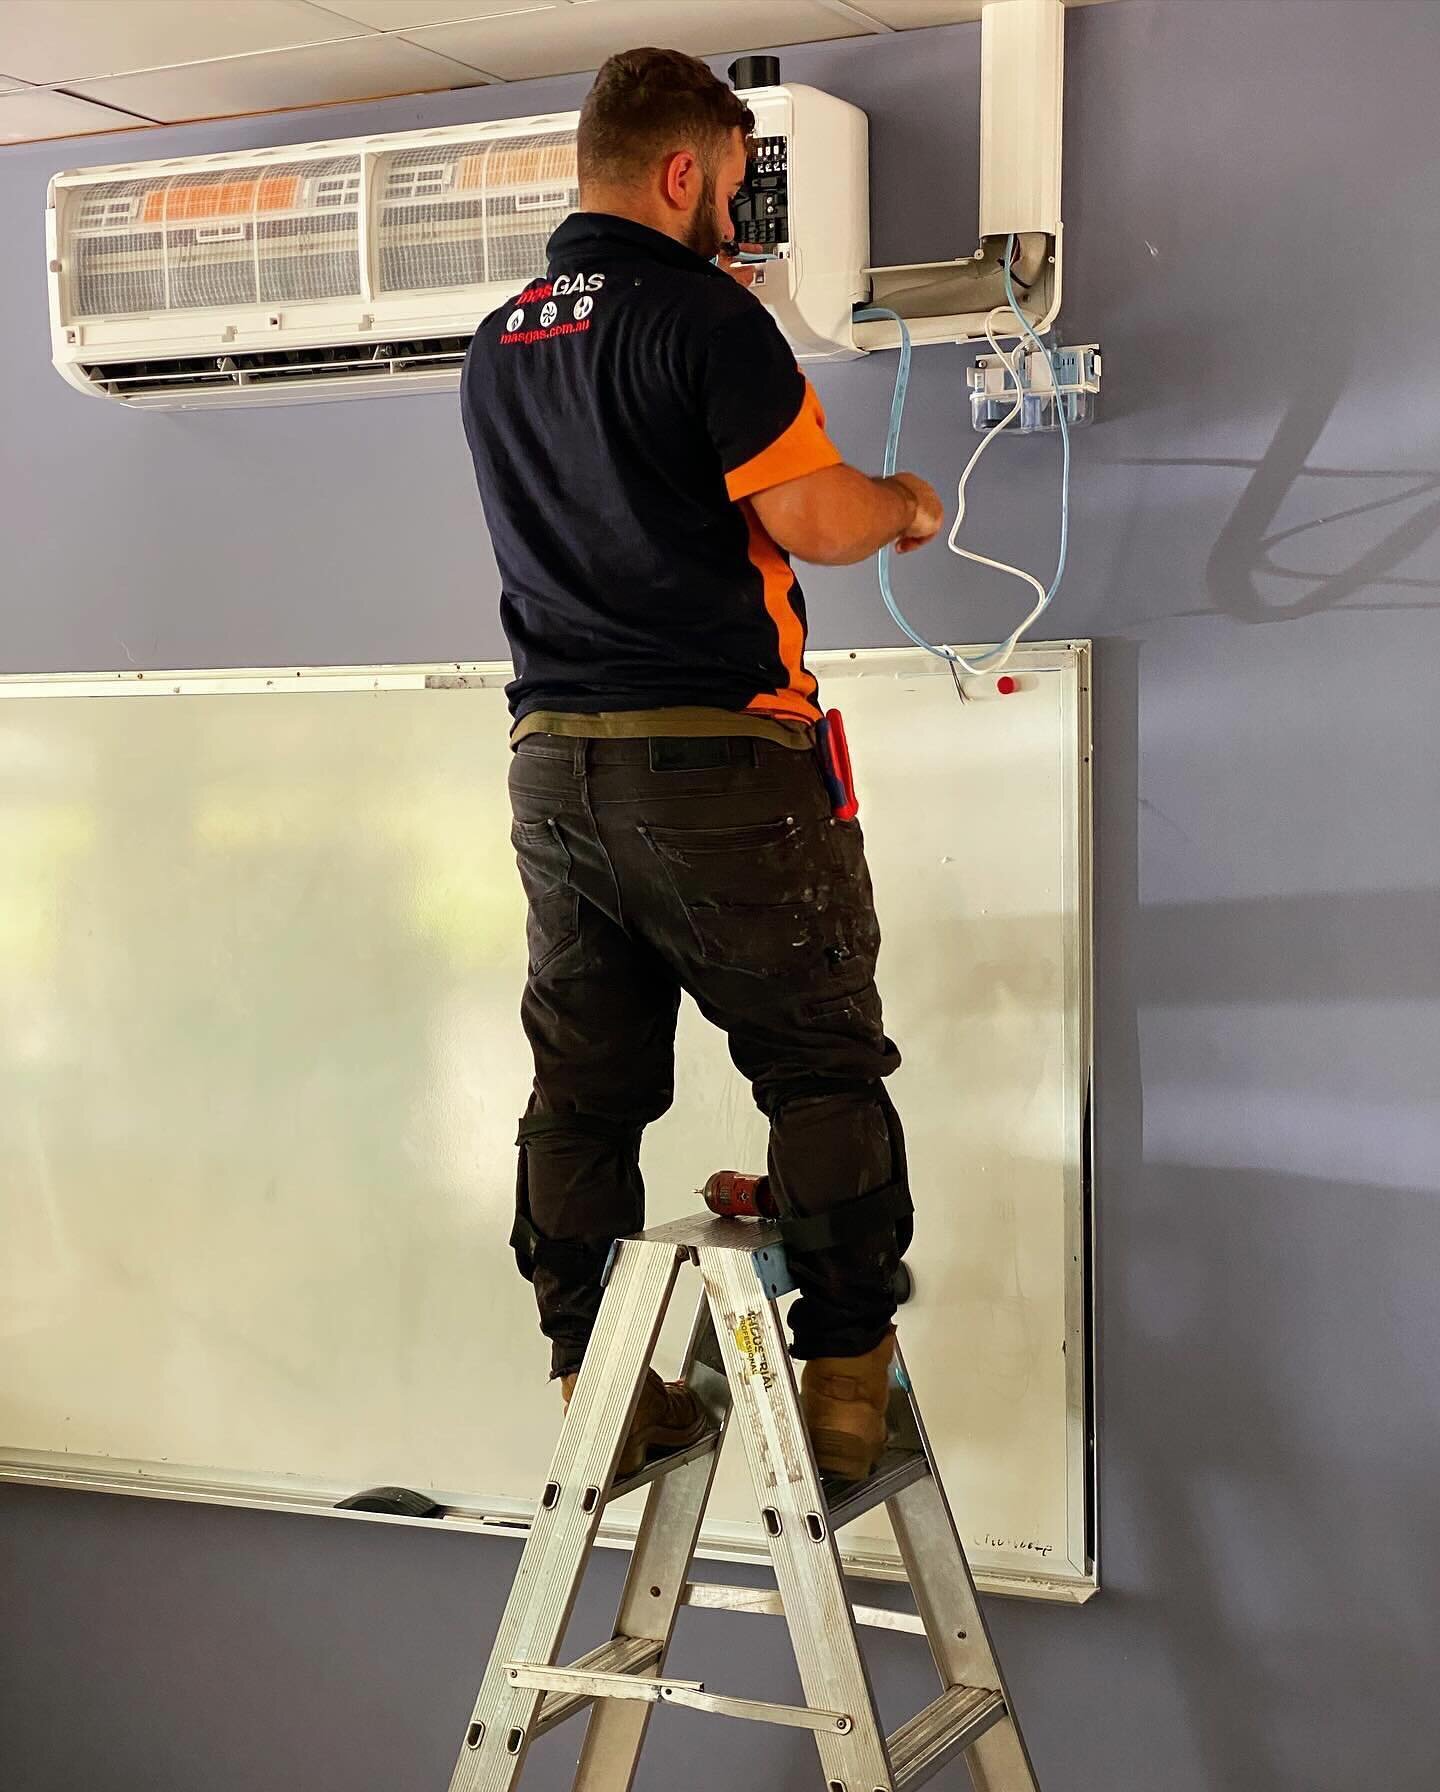 Split systems installation under way at this school. Getting ready for another school year! 📖 ⁣
⁣
⁣
#splitsystem #school #summer